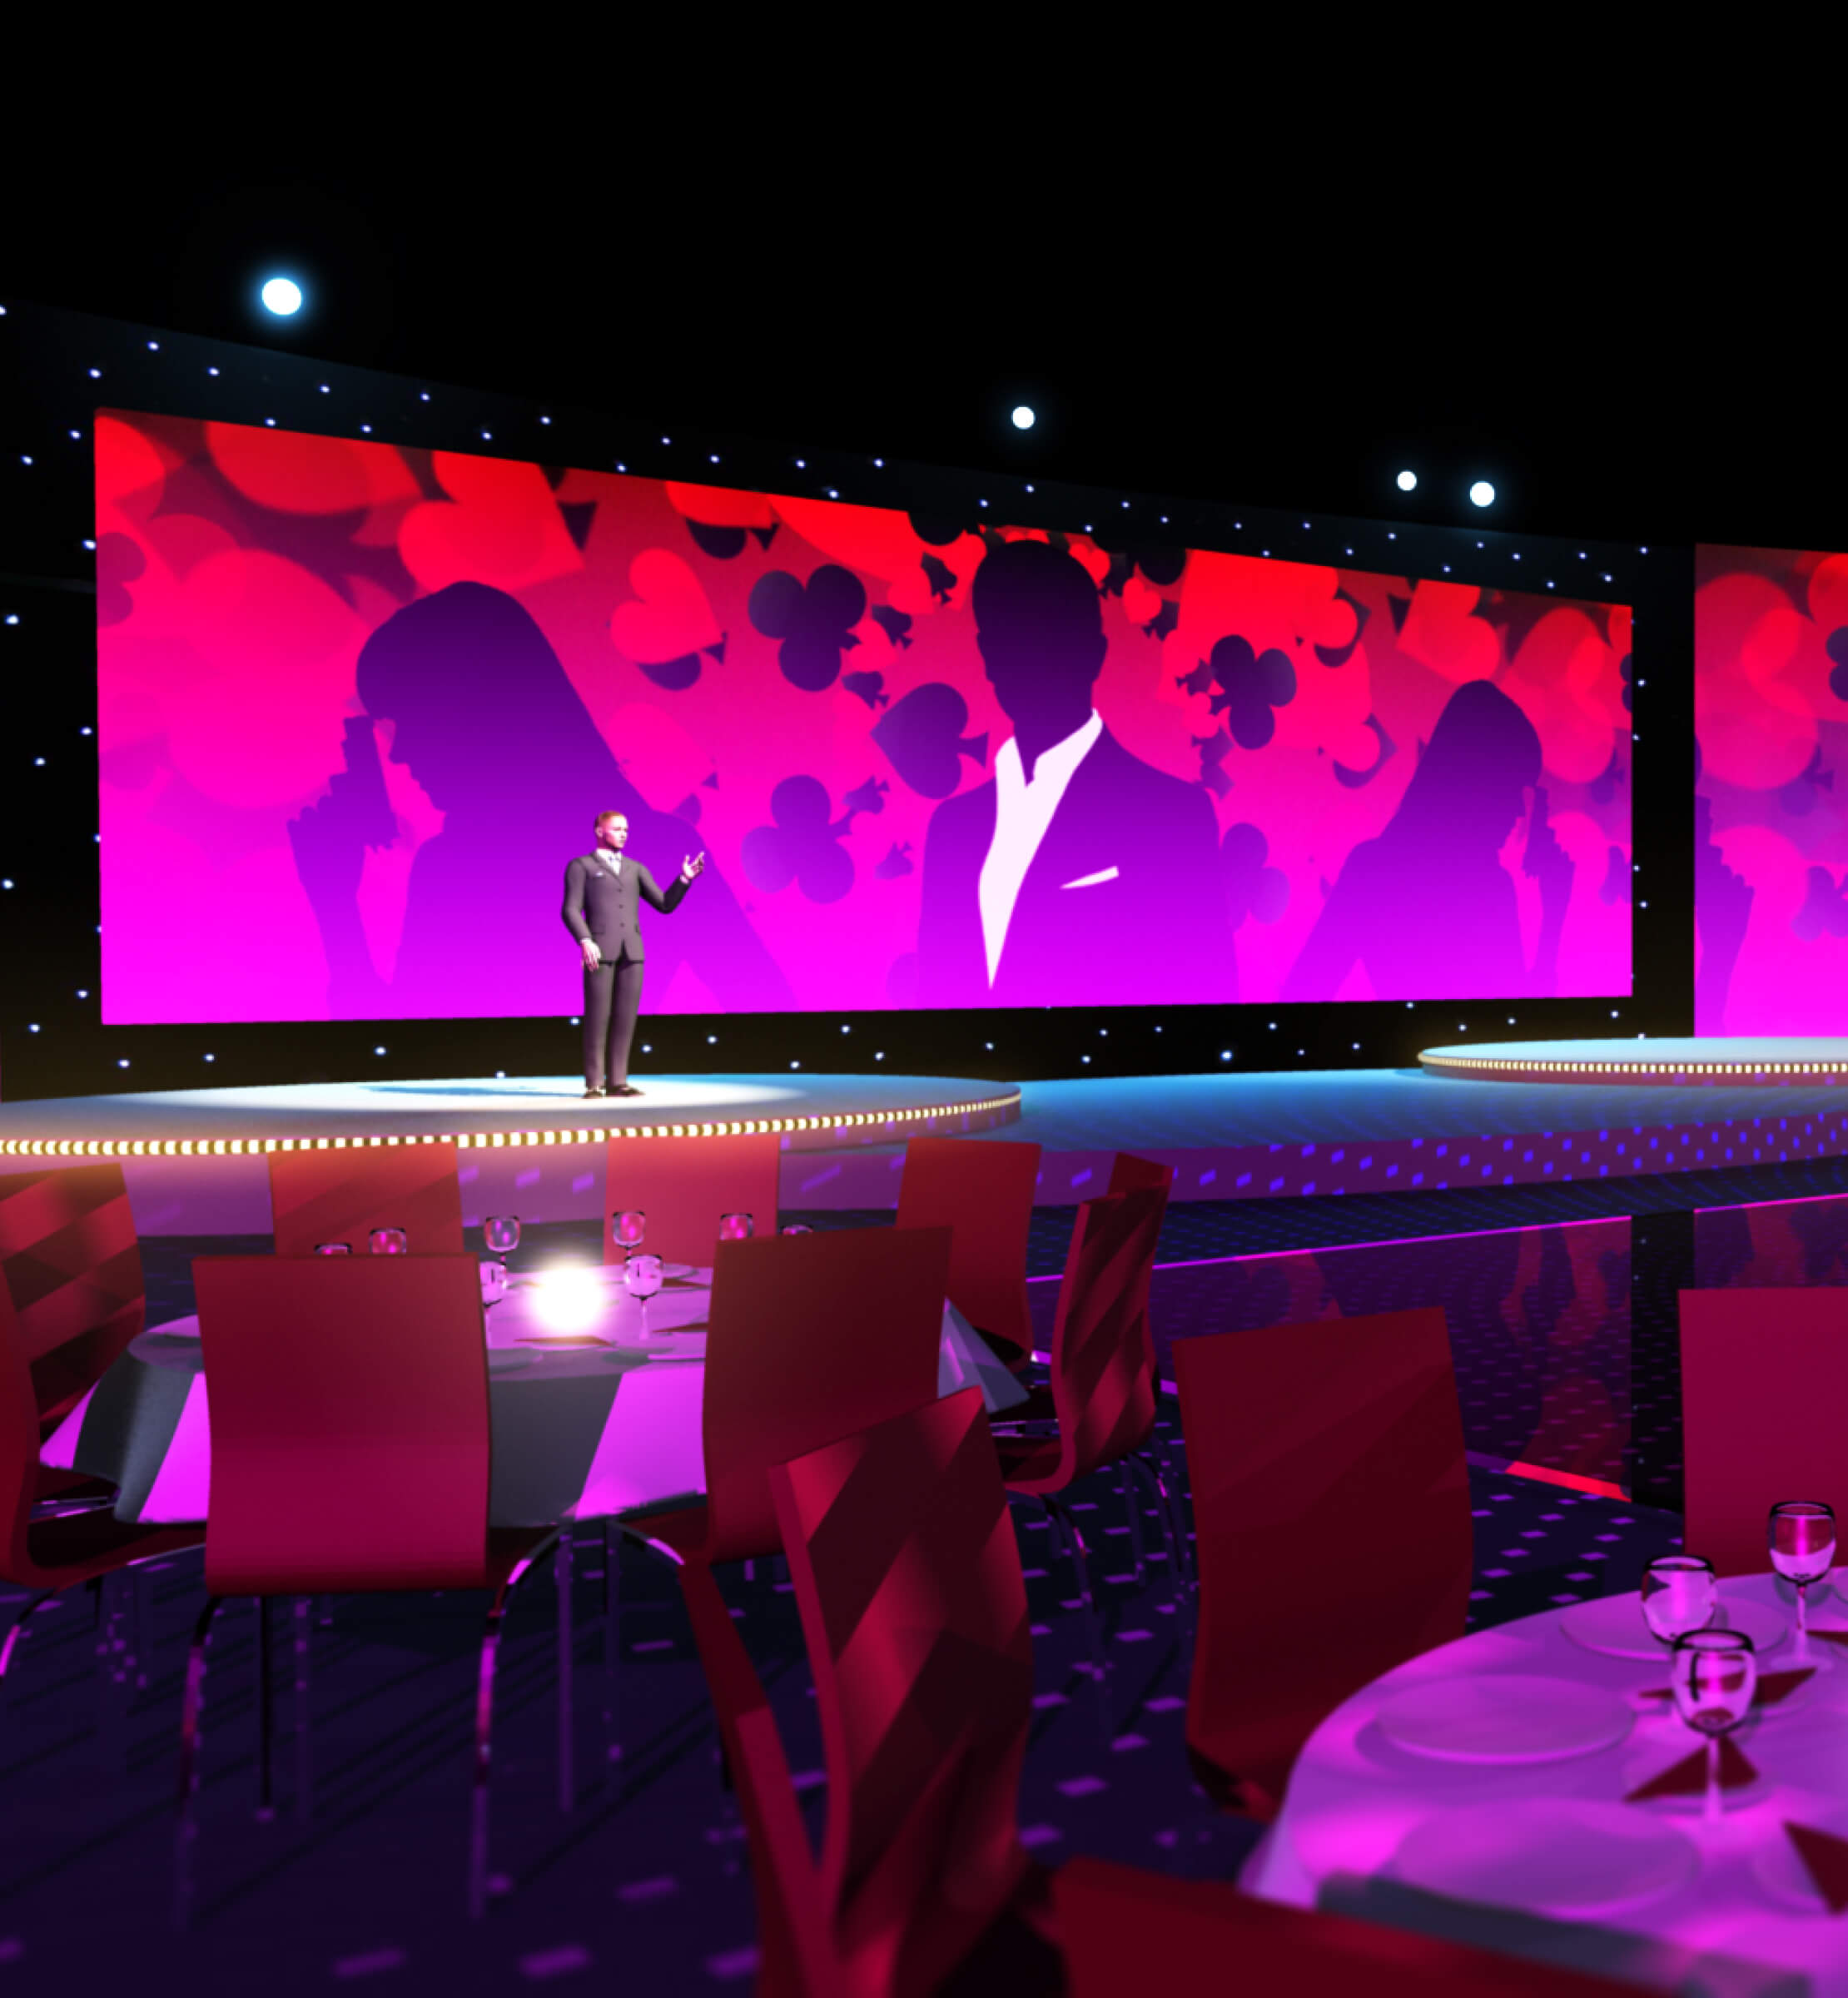 3D render of the themed animated stage backdrop and presenter on stage at the Dixons Retail Peak event